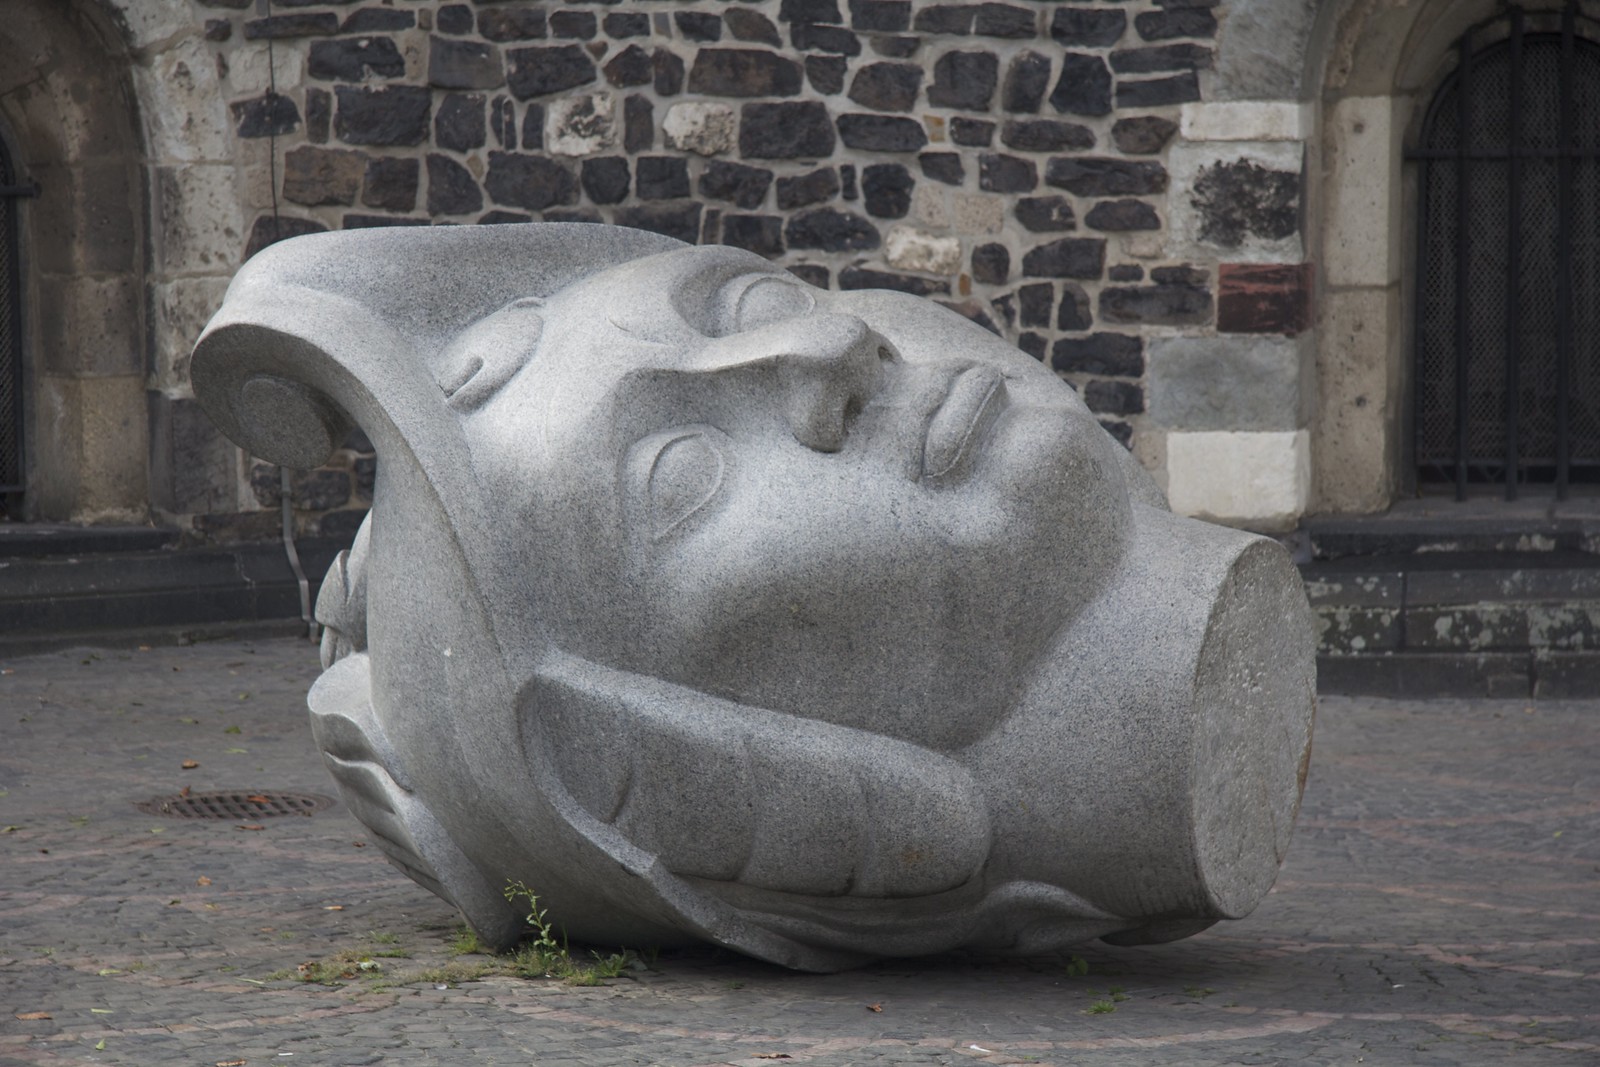 Gray stone sculpture depicting the fallen head of a larger statue